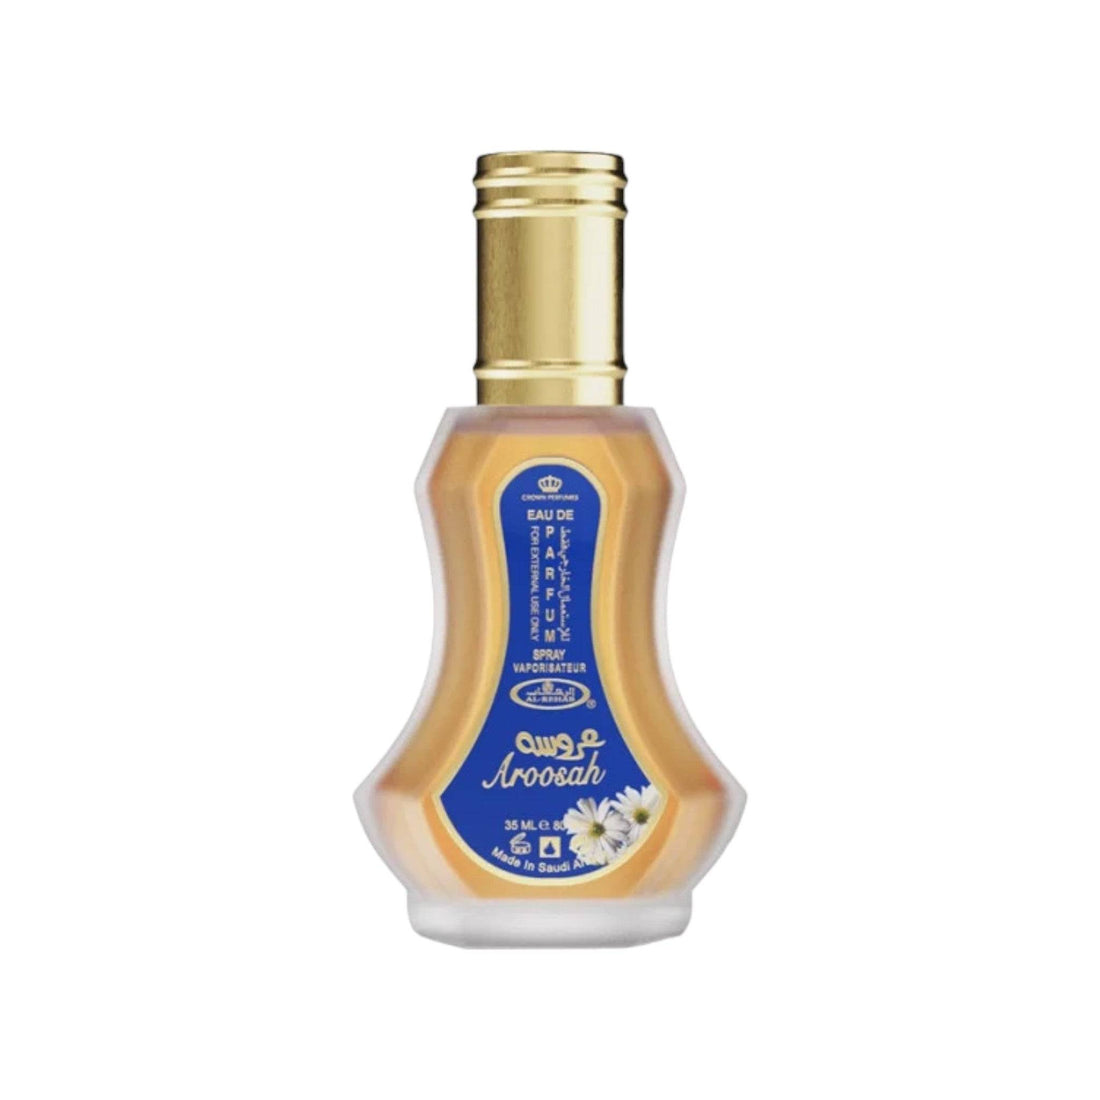 Elegant bottle of Aroosah Perfume by Al-Rehab, designed to capture the essence of a bride's charm and elegance.